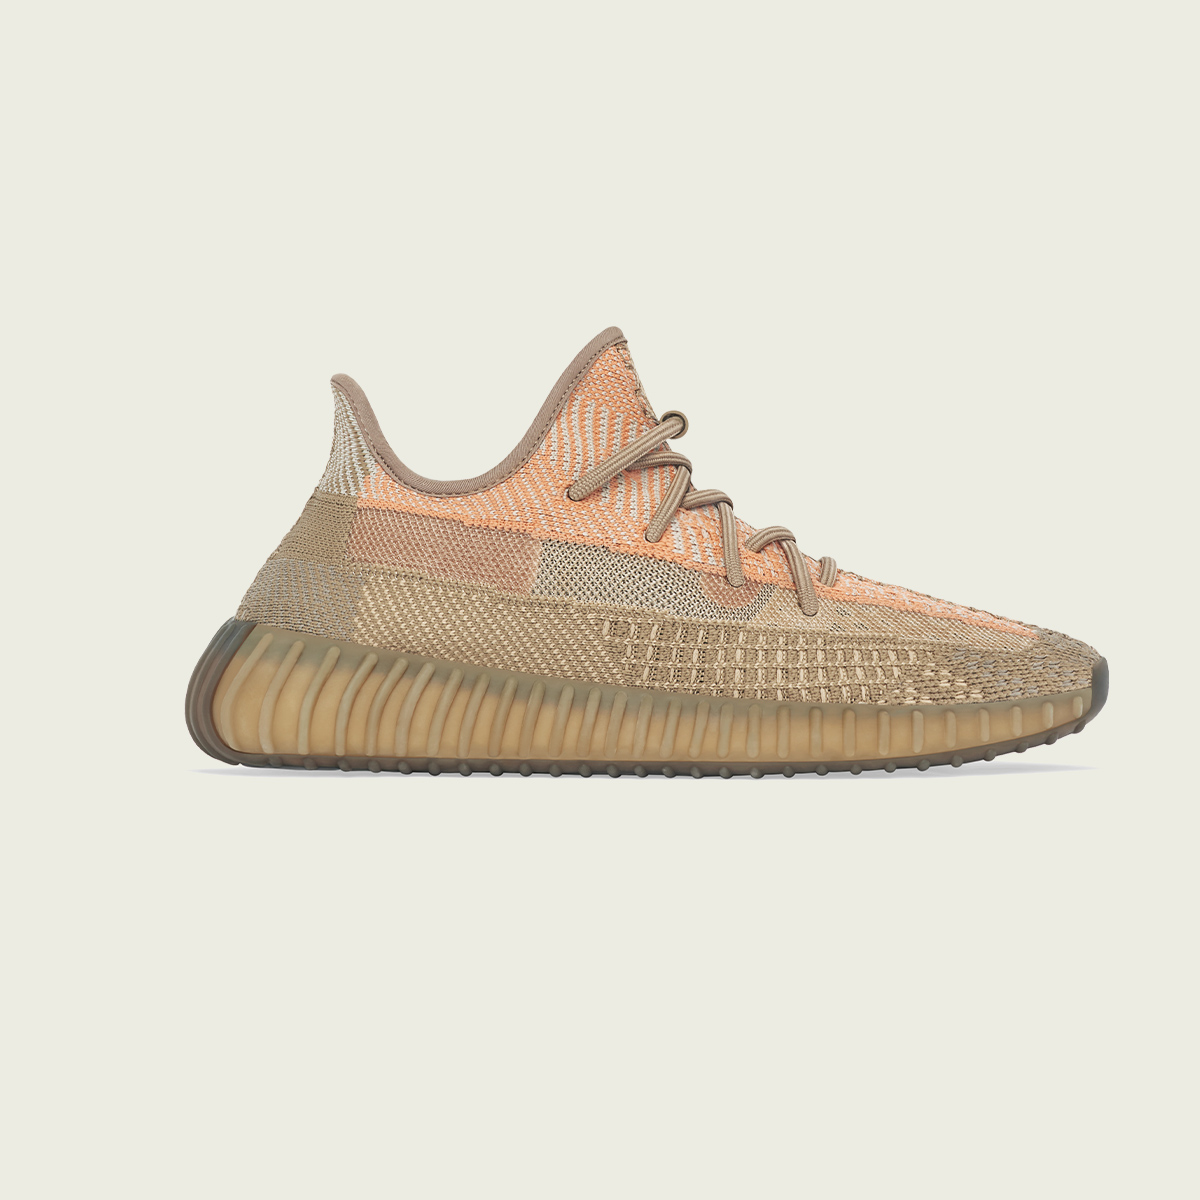 YEEZY BOOST 350 V2 SAND TAUPE Right Social IG 1200×1200